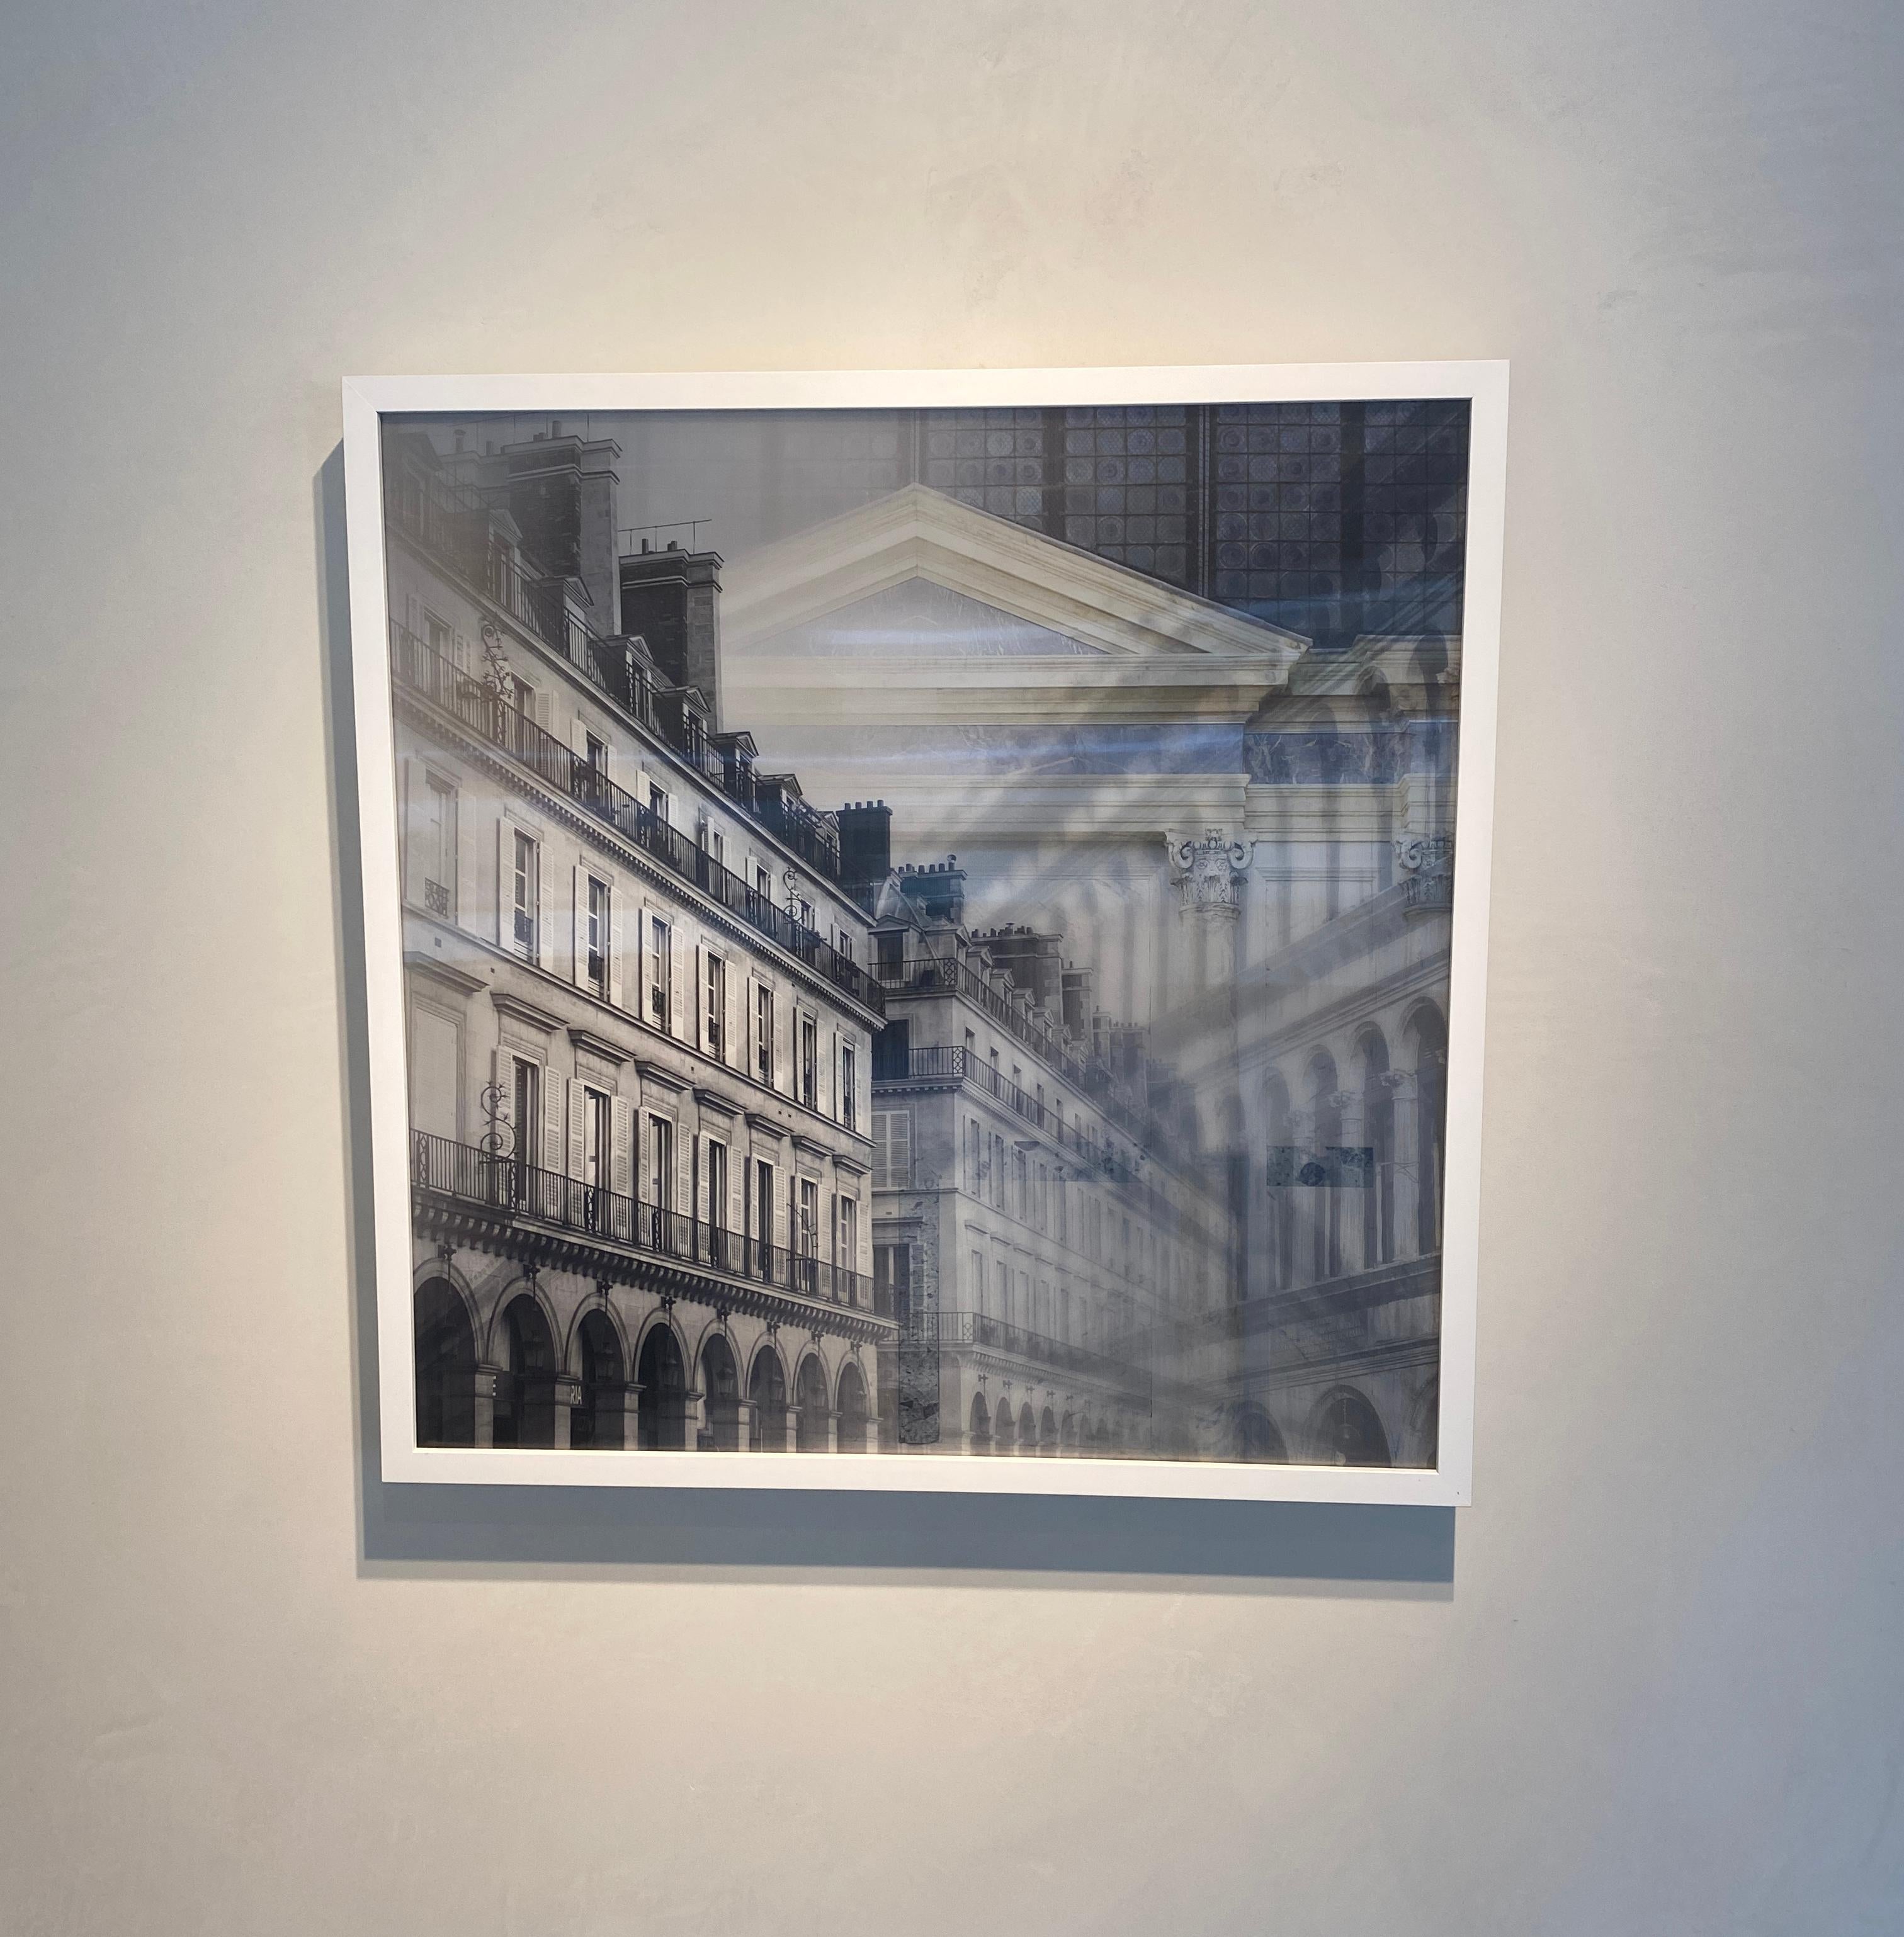 Venezia and Paris-  Lenticular architectural framed photograph  - Photograph by Charles Kay Jr.